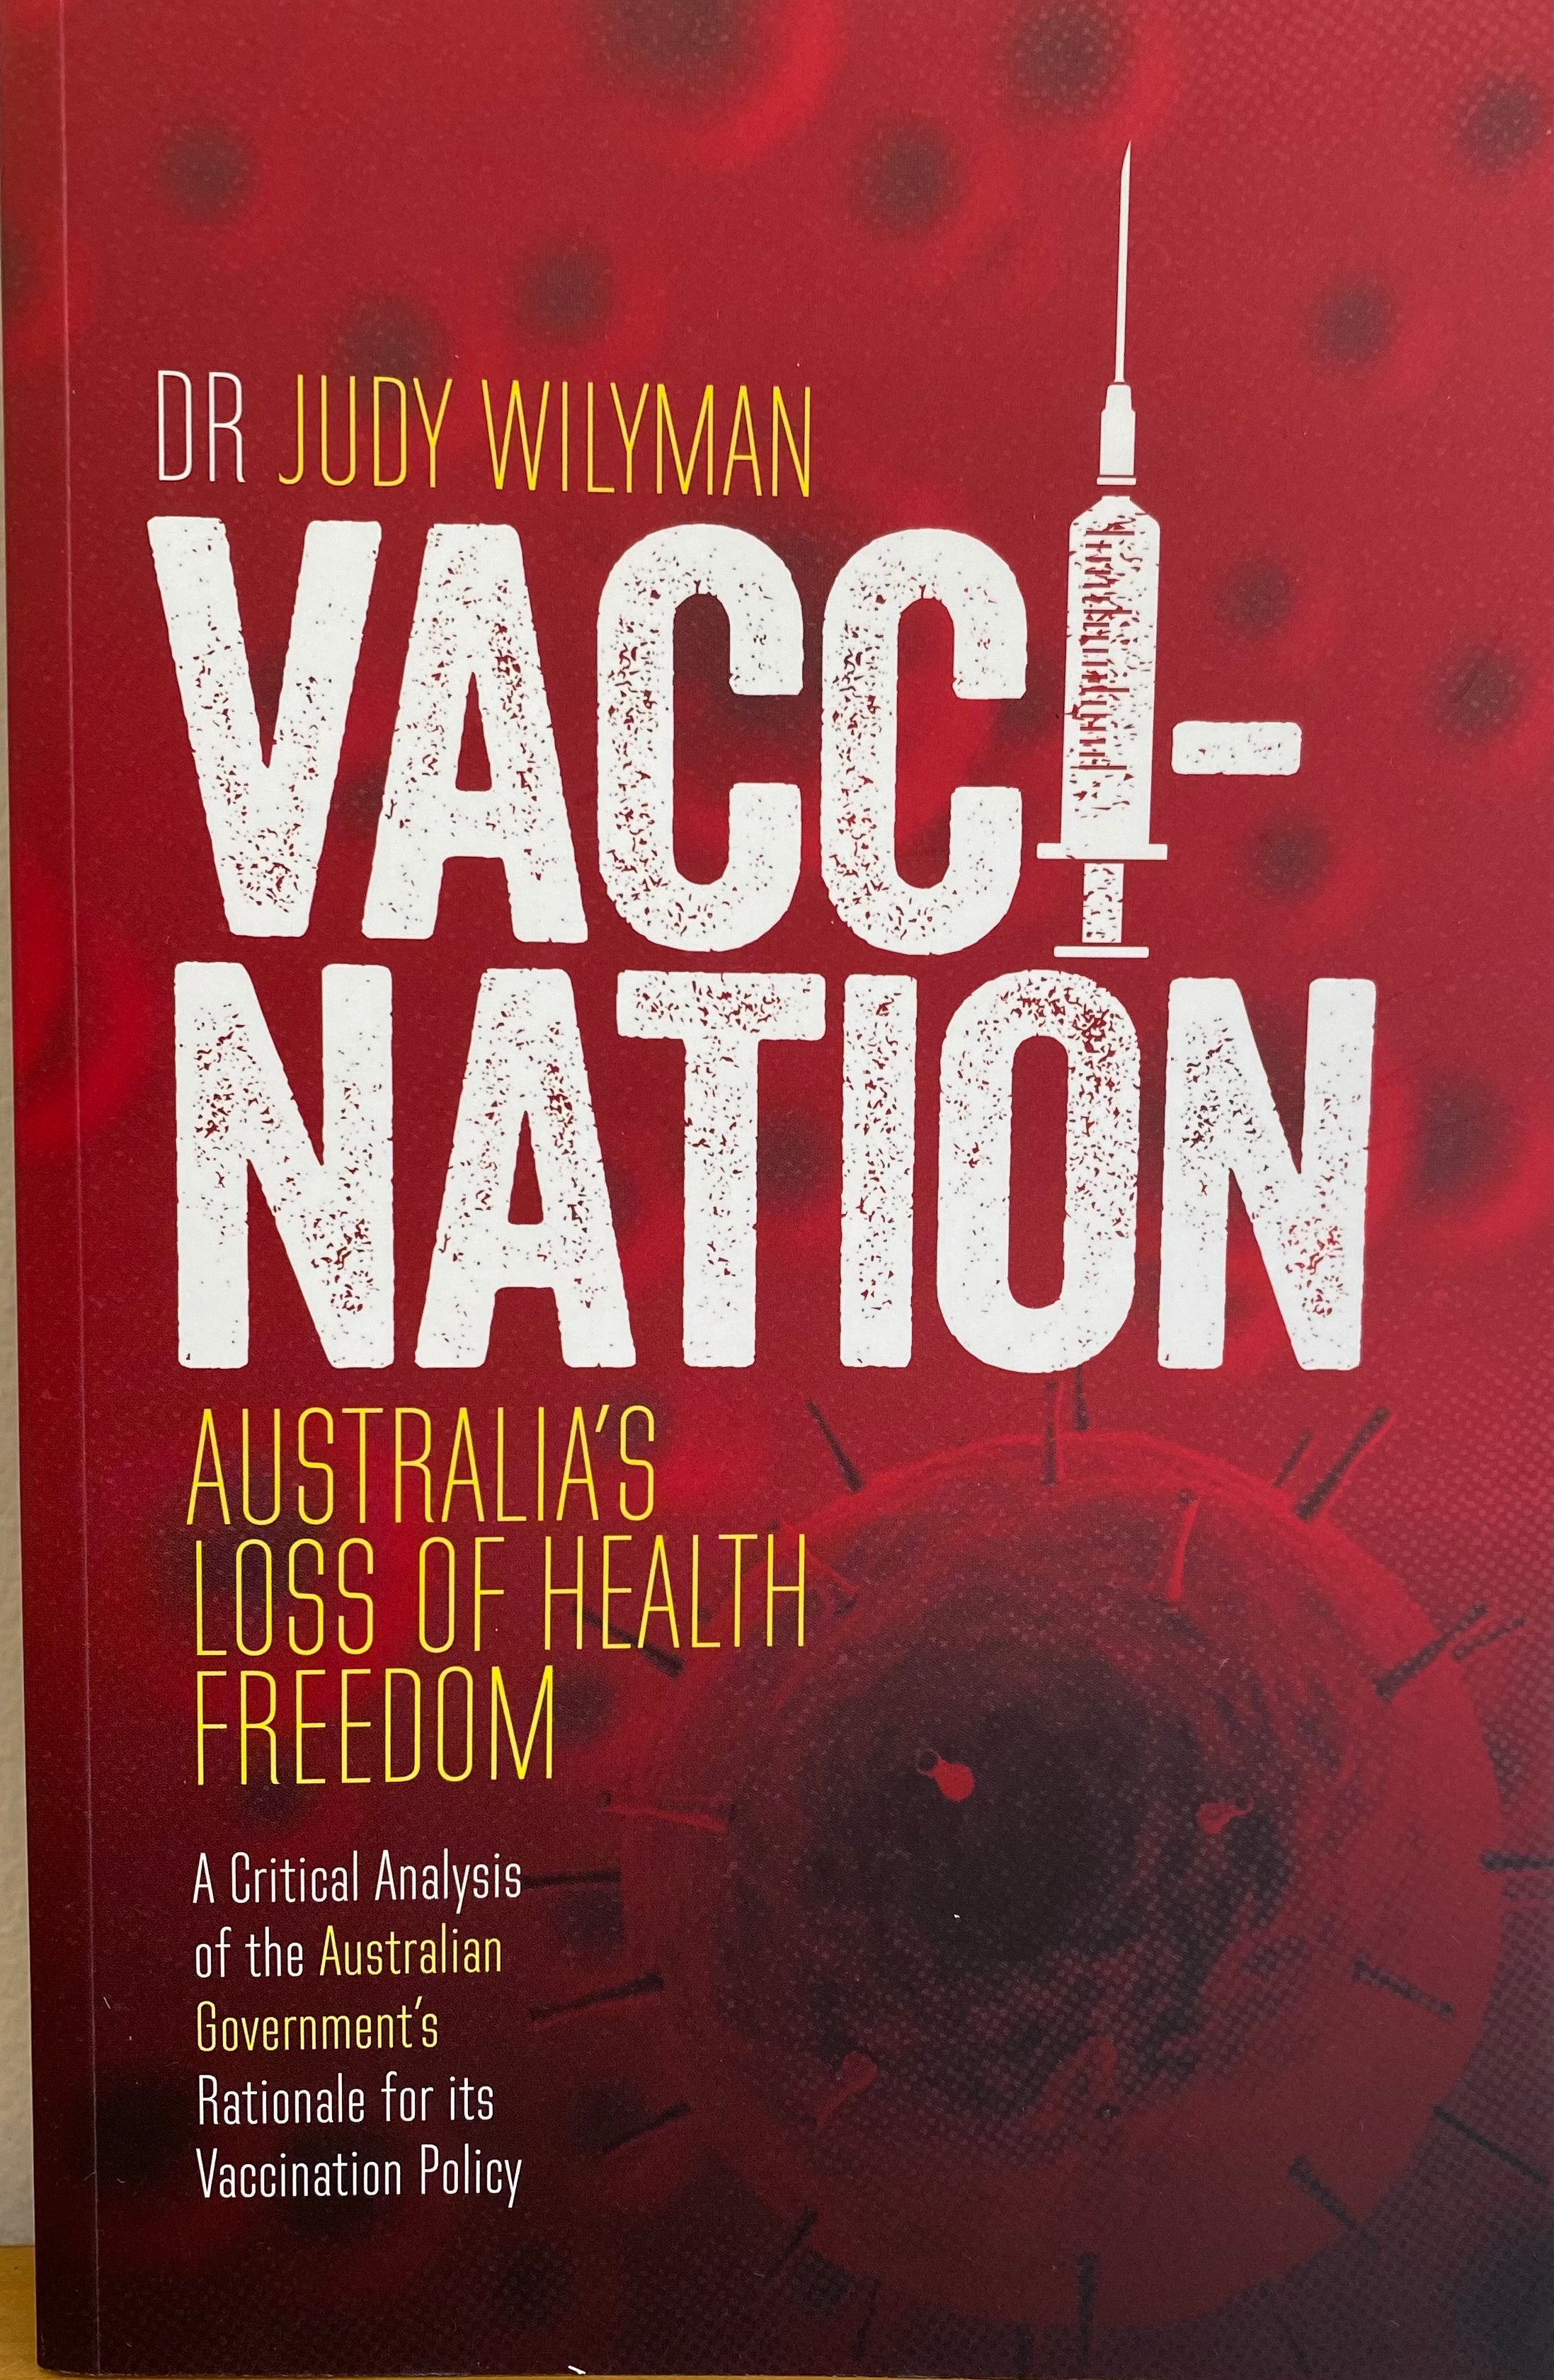 BOOK: Vaccination by Dr Judy Wilyman